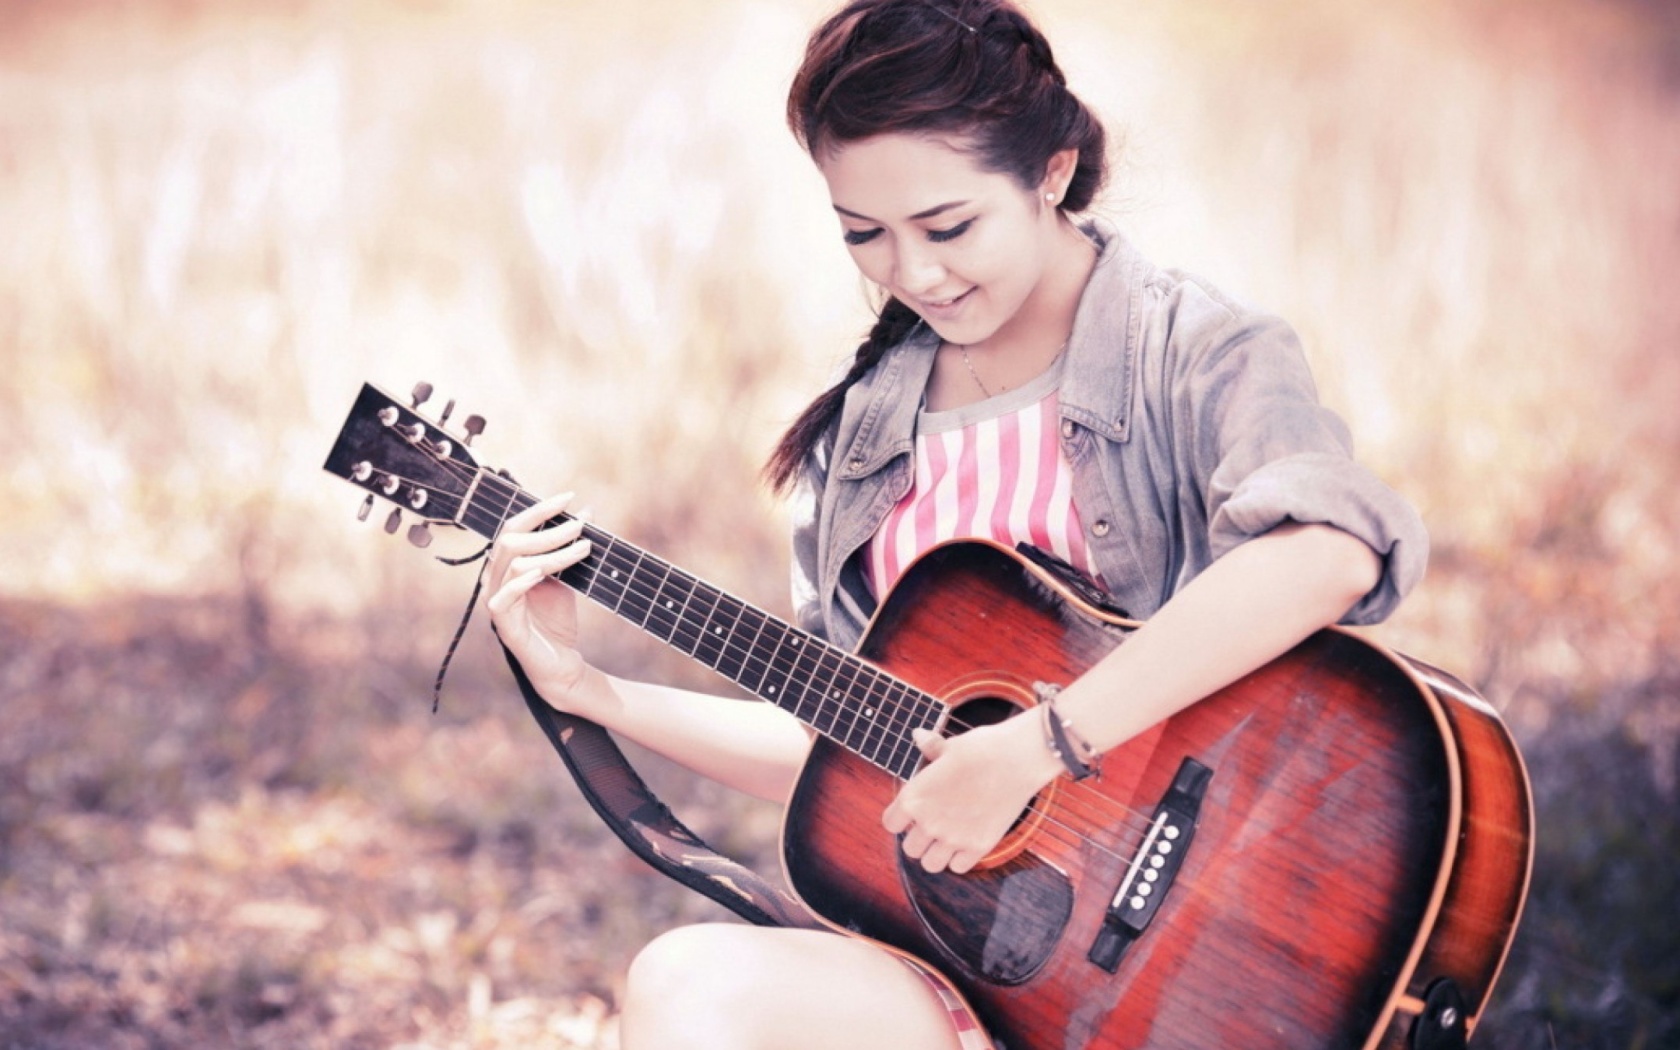 Chinese girl with guitar wallpaper 1680x1050